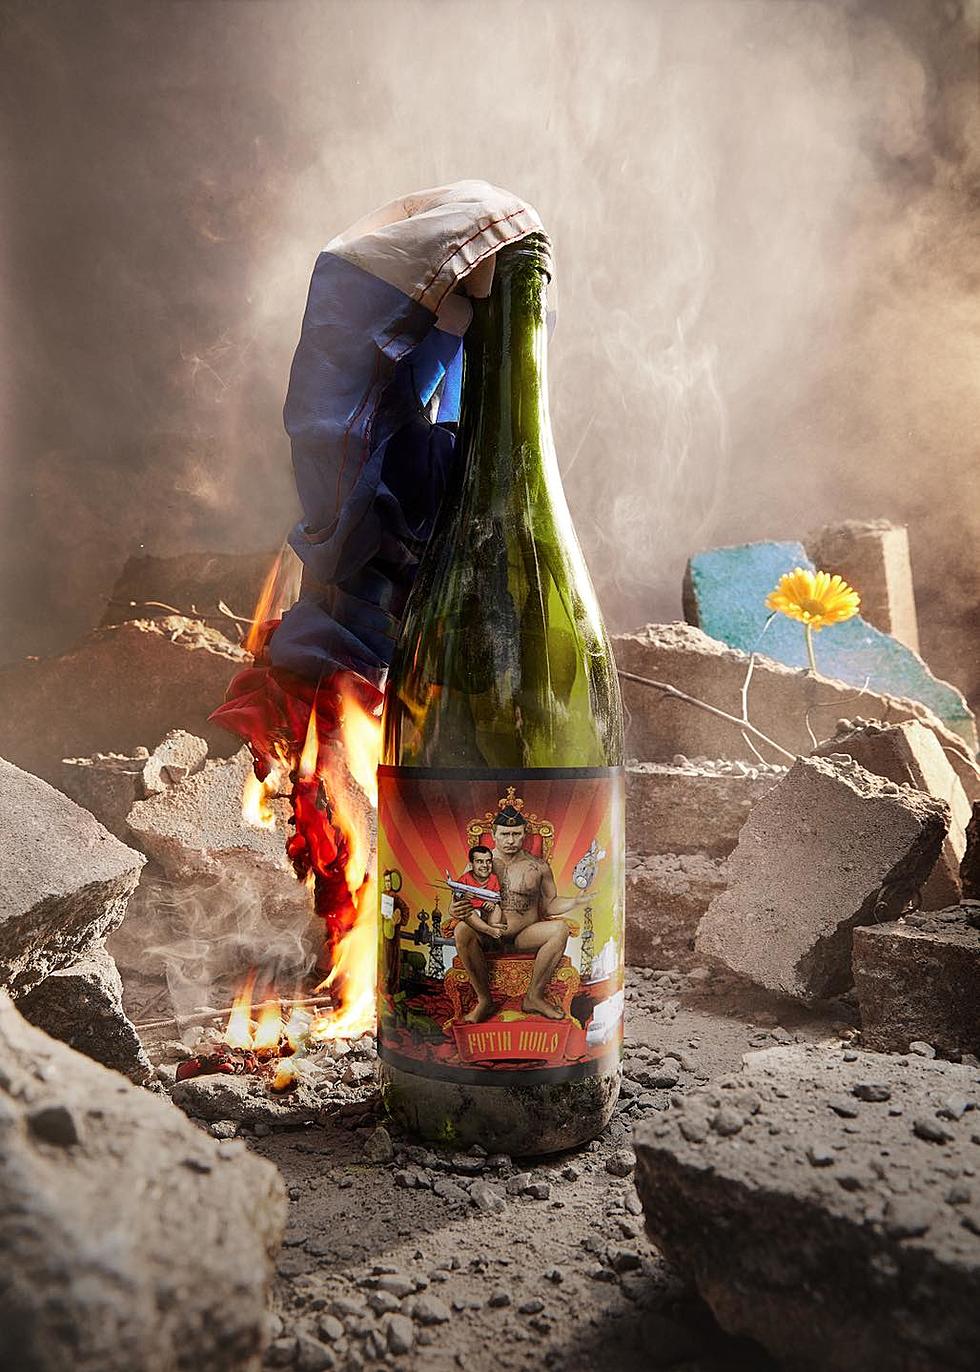 What If Buying a Beer Could Help Ukraine Win the War?